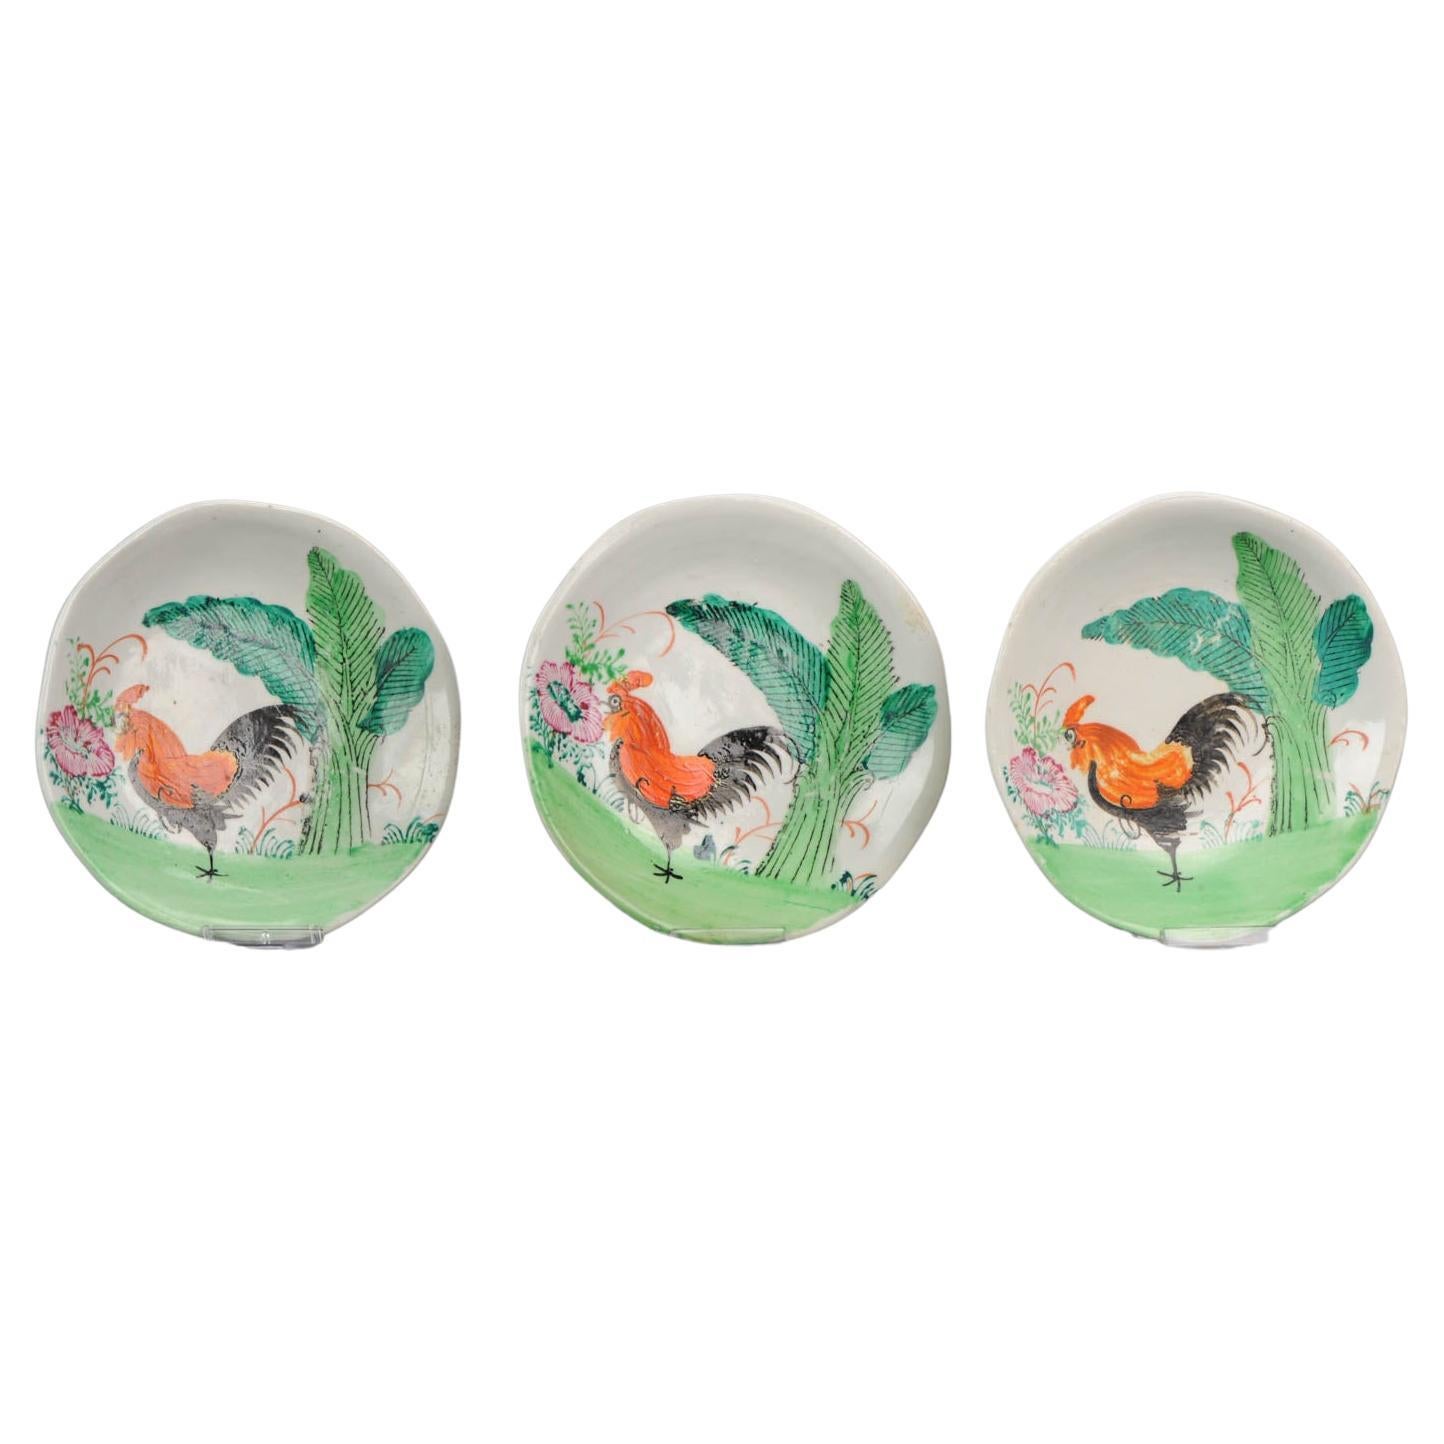 Set of 3 Chinese Porcelain Polychrome Serving Dish Roosters Asia, 1960s &1970s For Sale